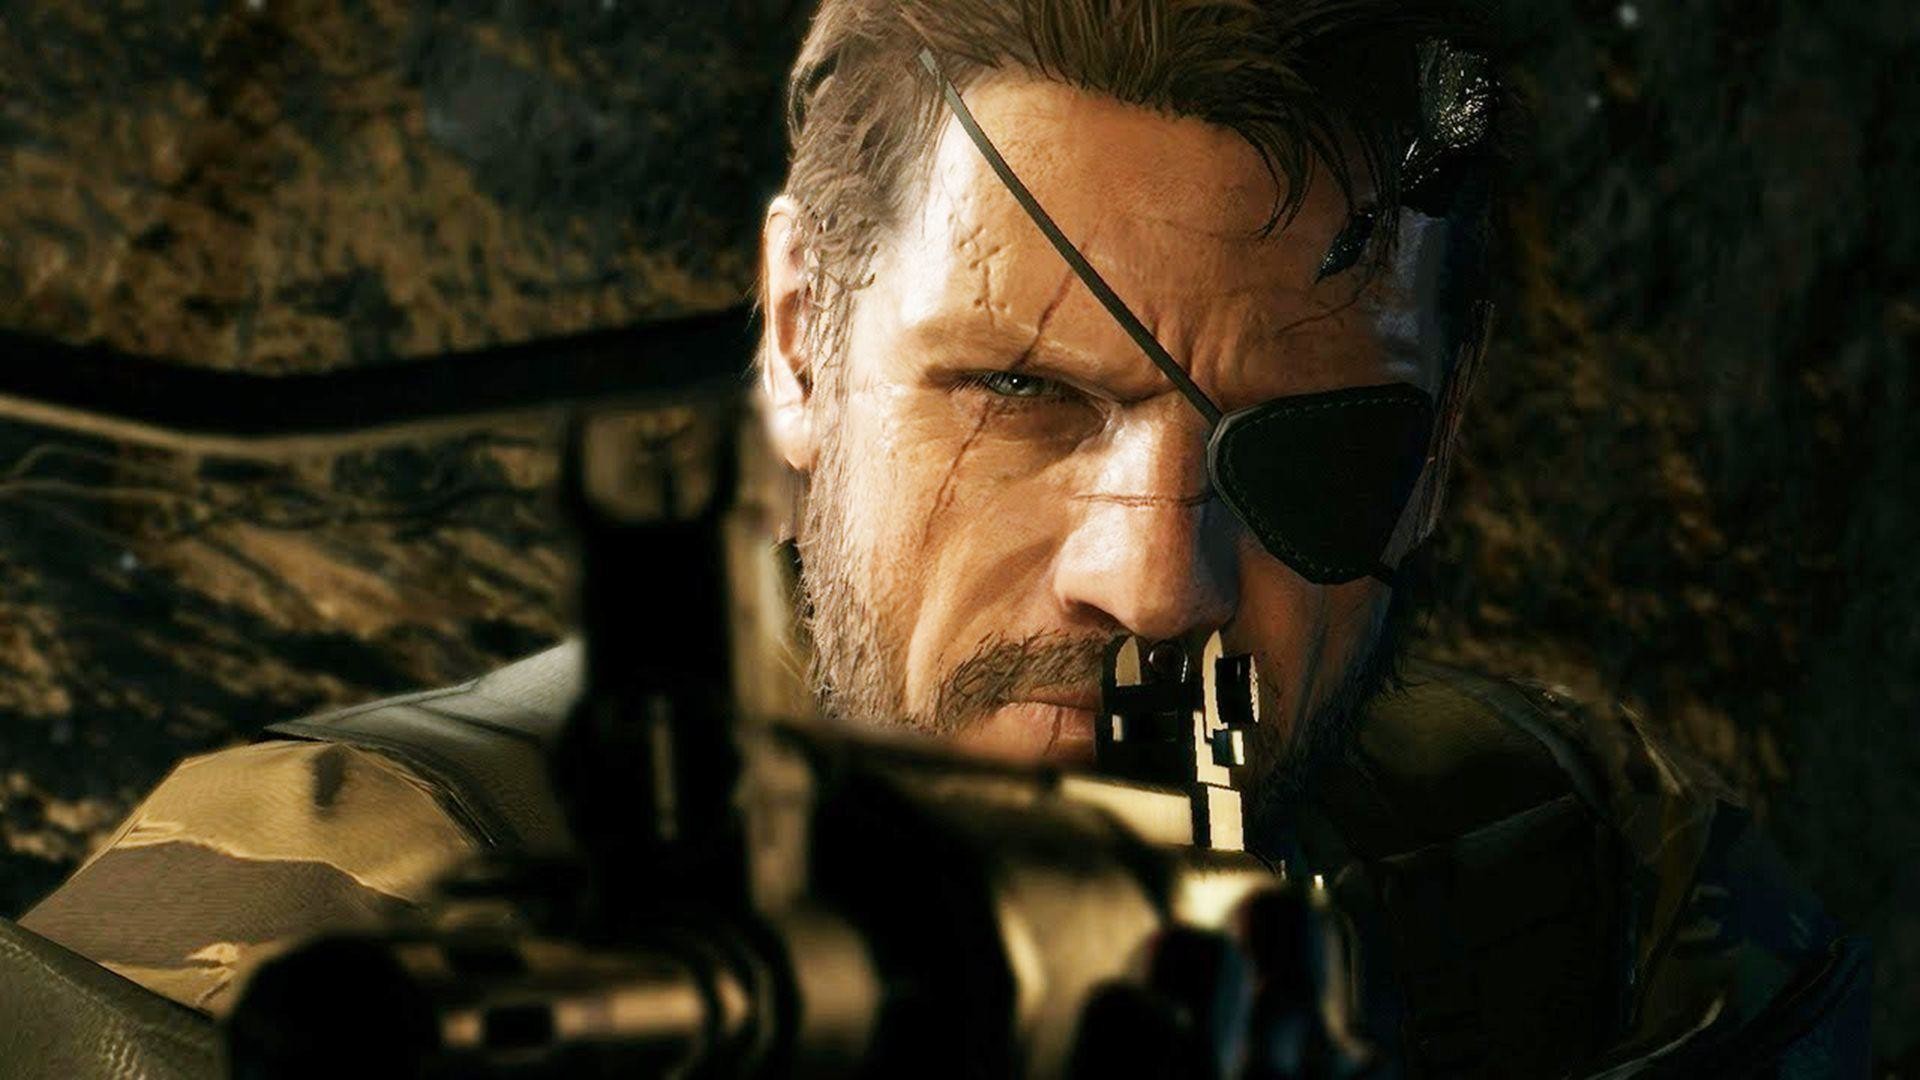 1920x1080 Metal Gear Solid 5: The Phantom Pain Wallpapers, Pictures, Images